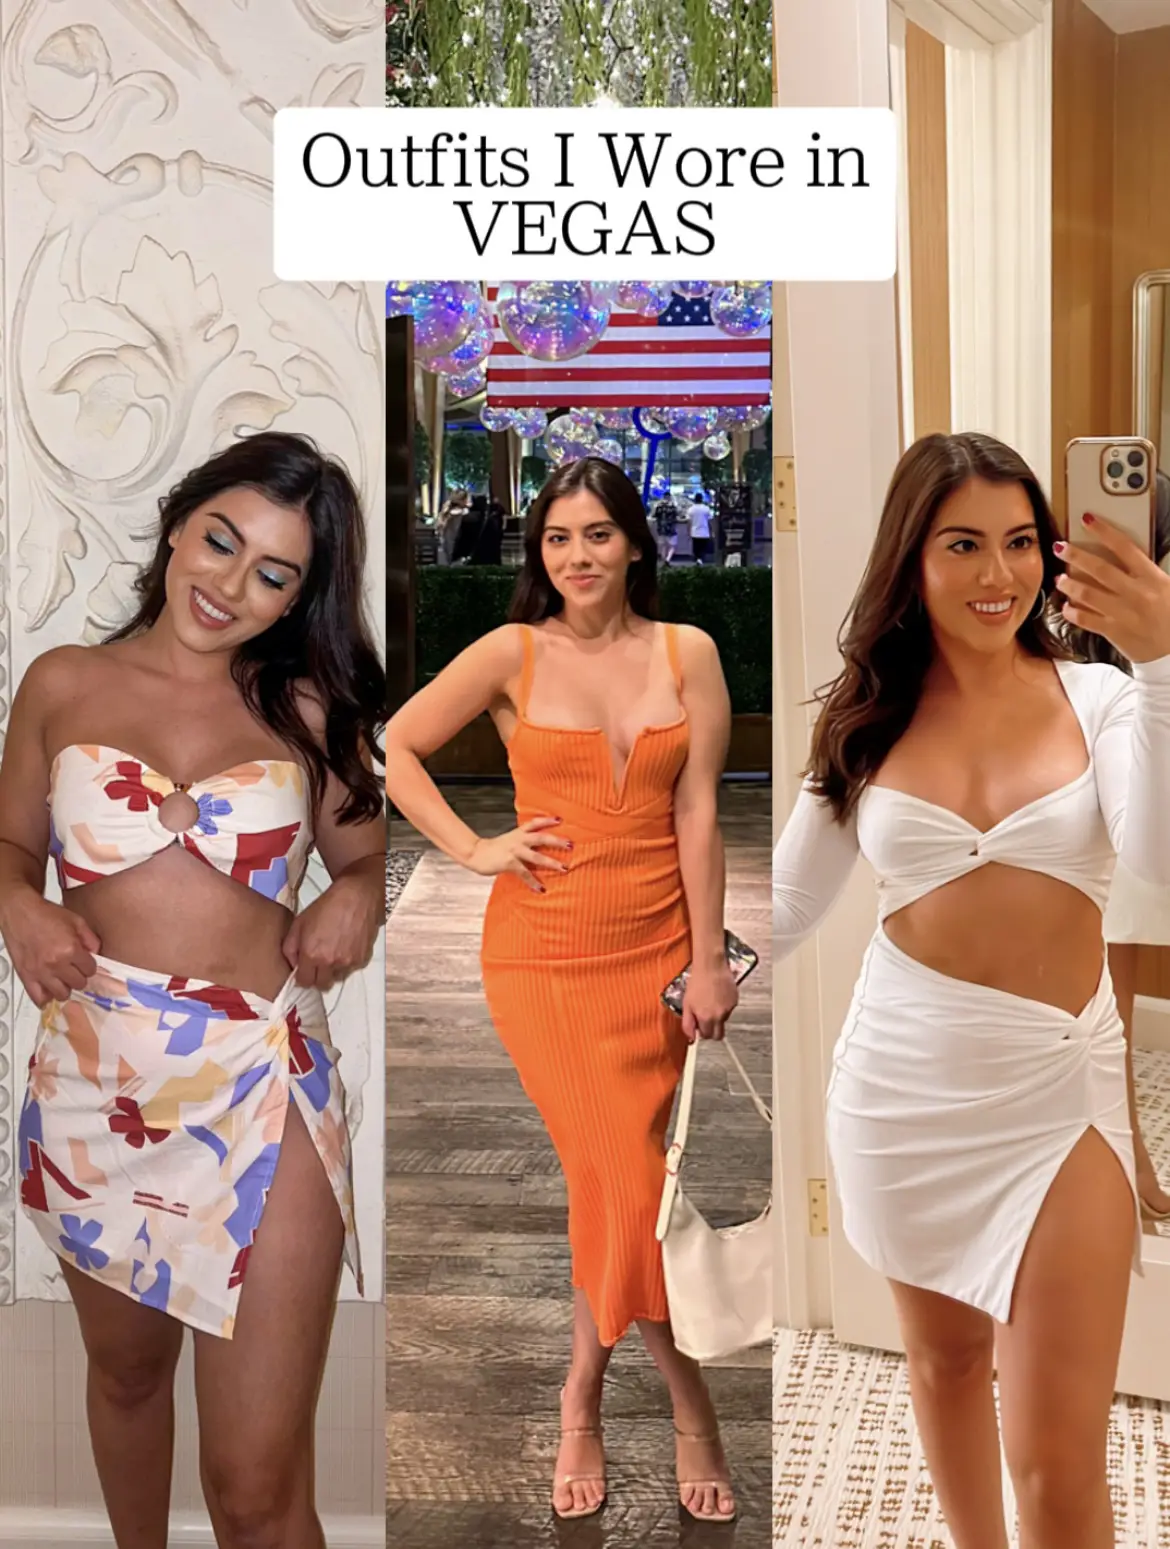 Outfits I Wore in Vegas, Gallery posted by Girlnamedjazz